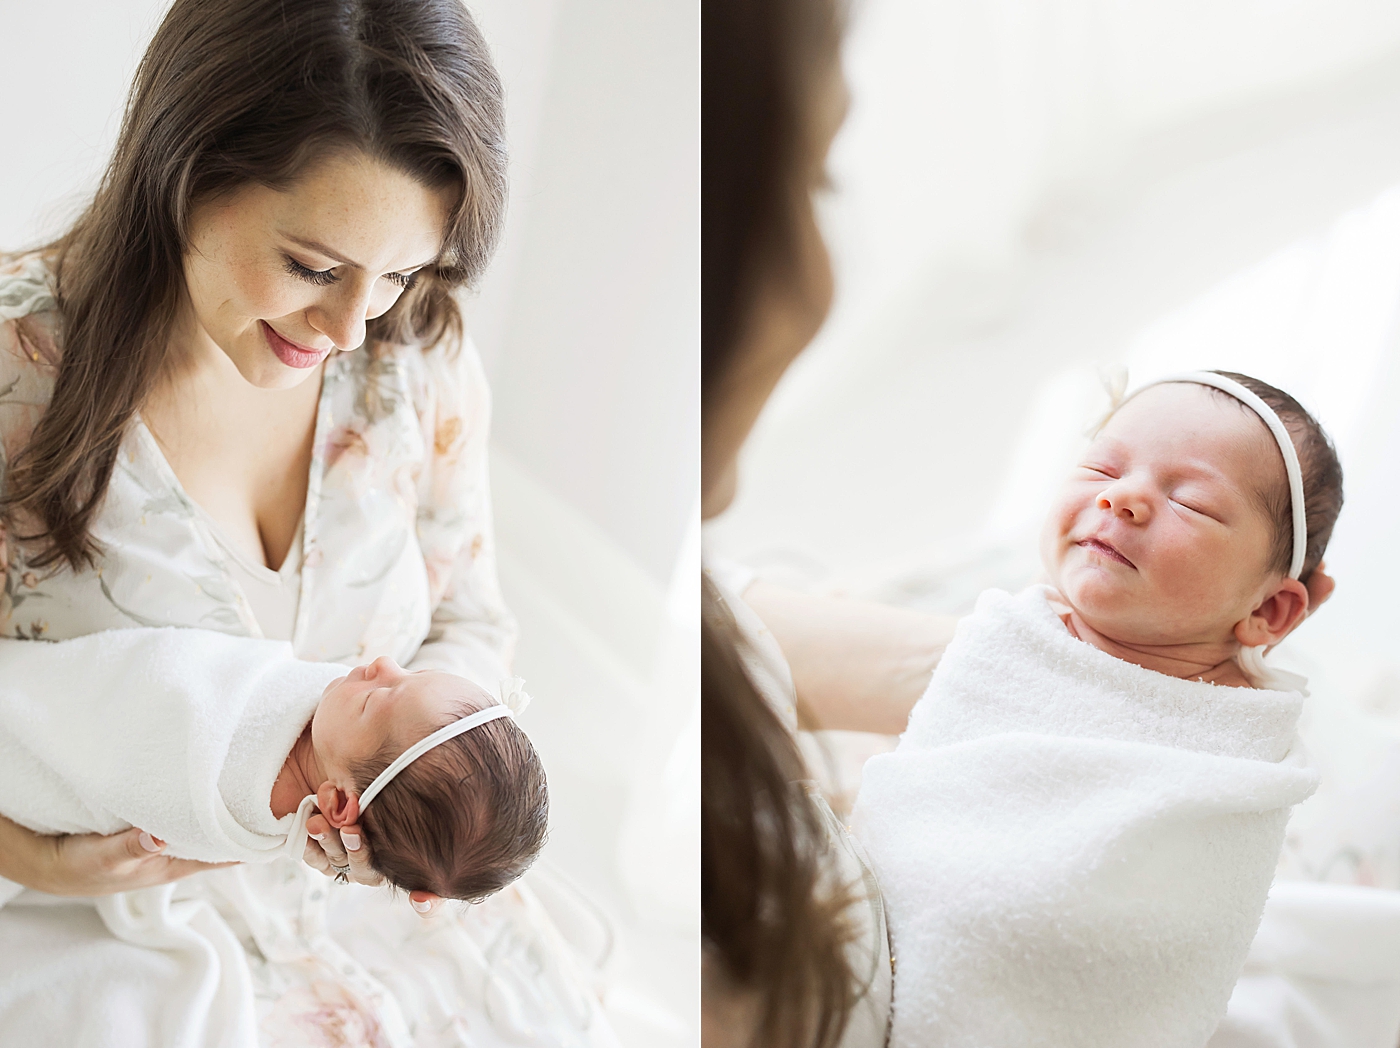 Mom holding her newborn daughter. Photo by Fresh Light Photography.